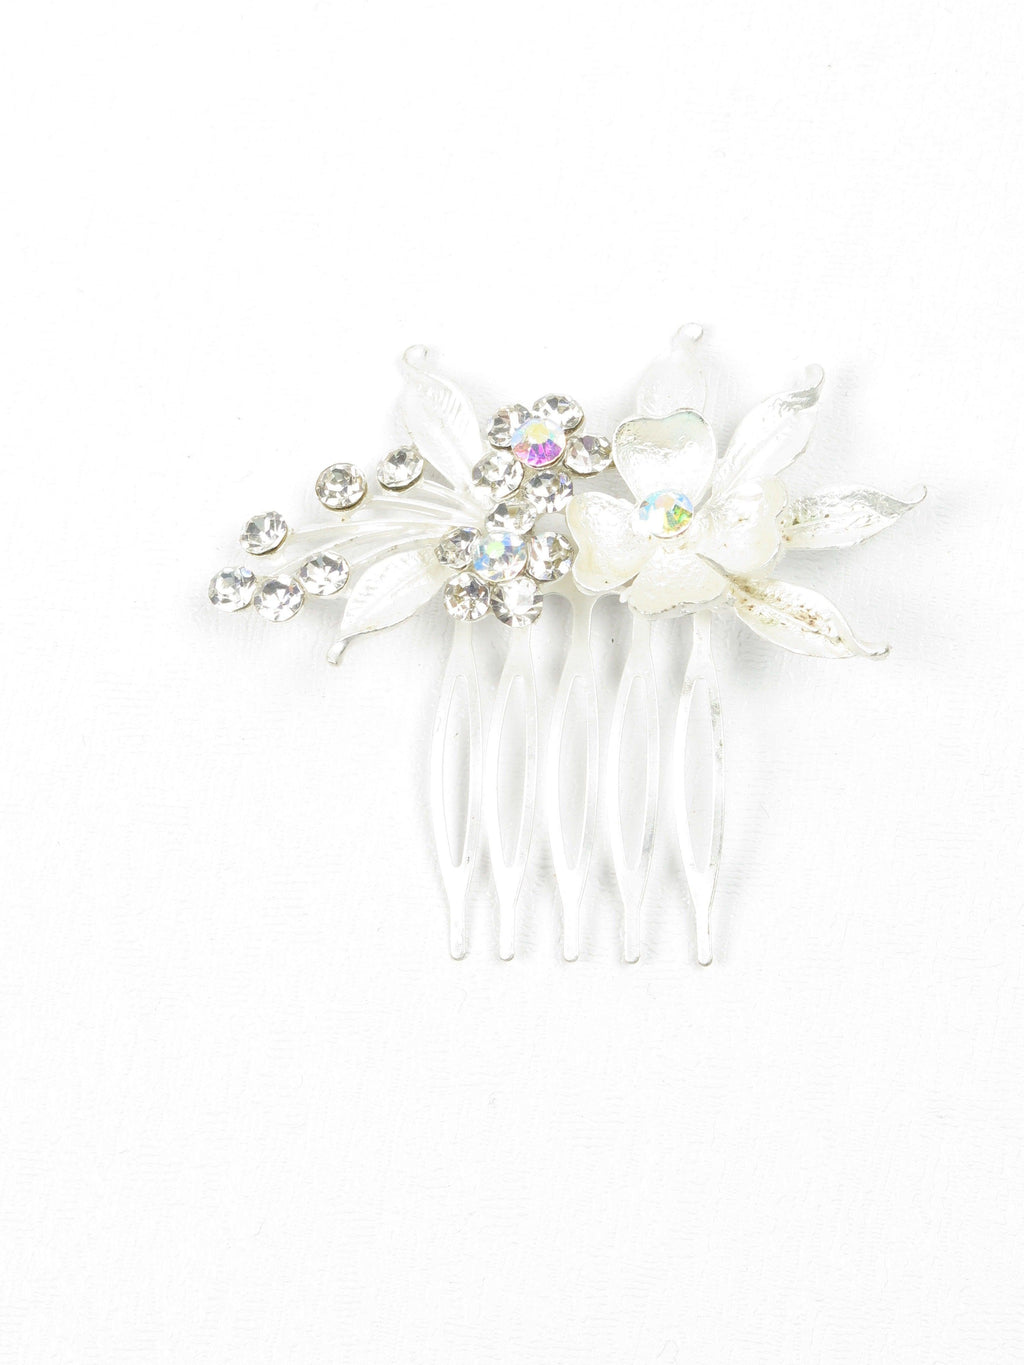 Silver & Floral Small Hair Comb - The Harlequin